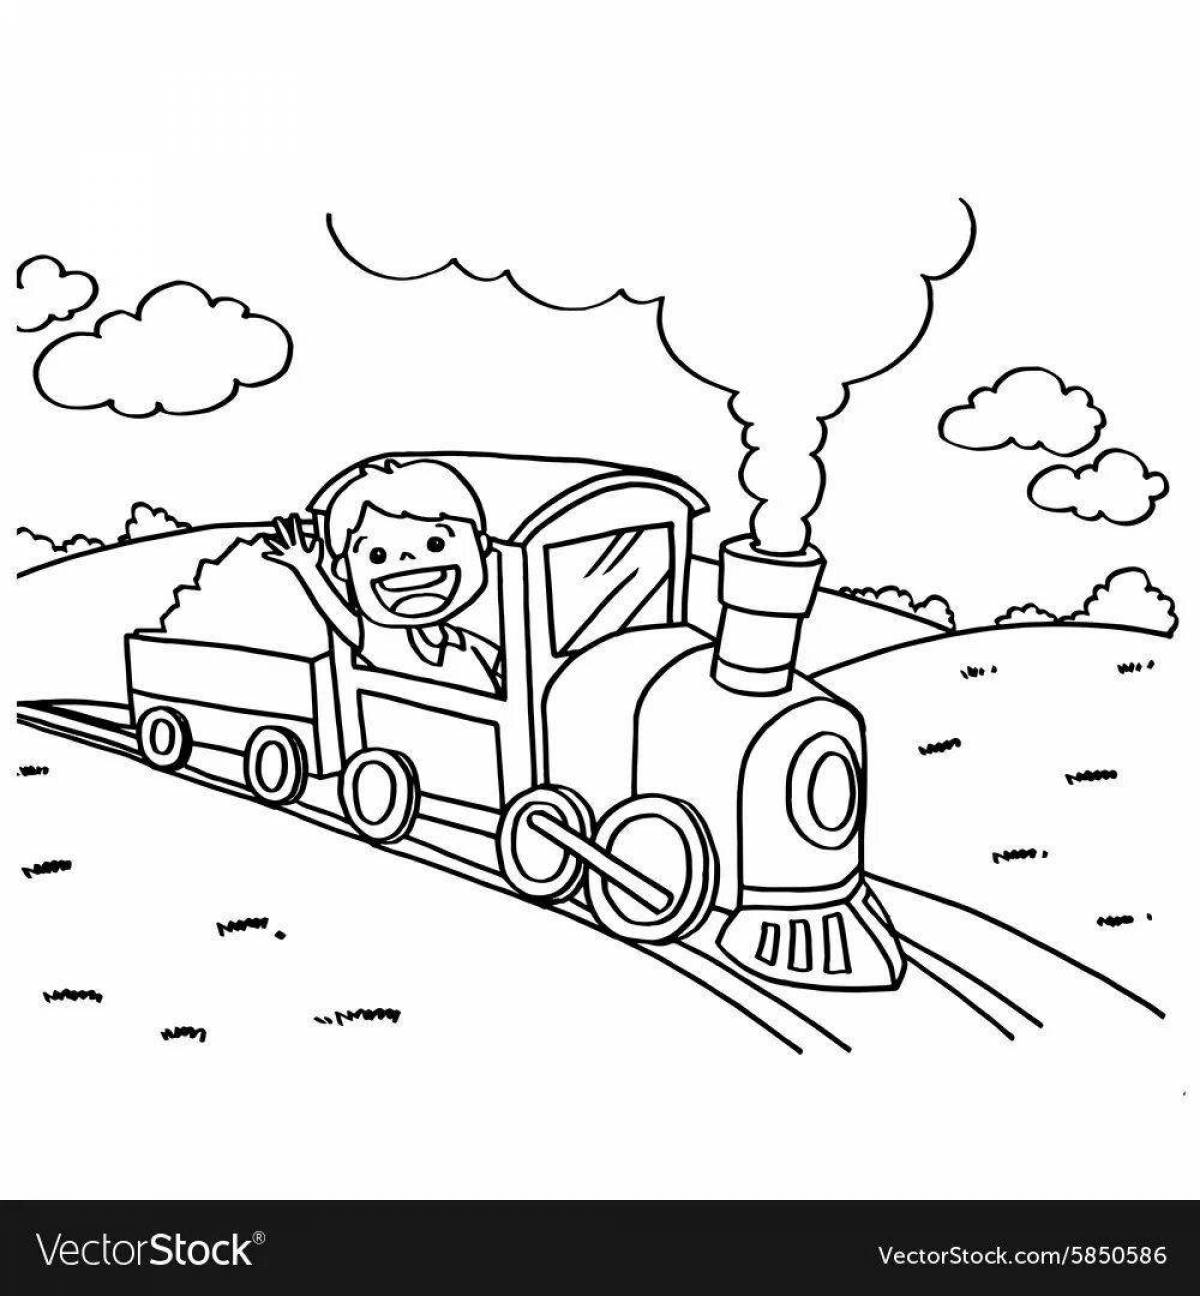 Cute railroad safety coloring page